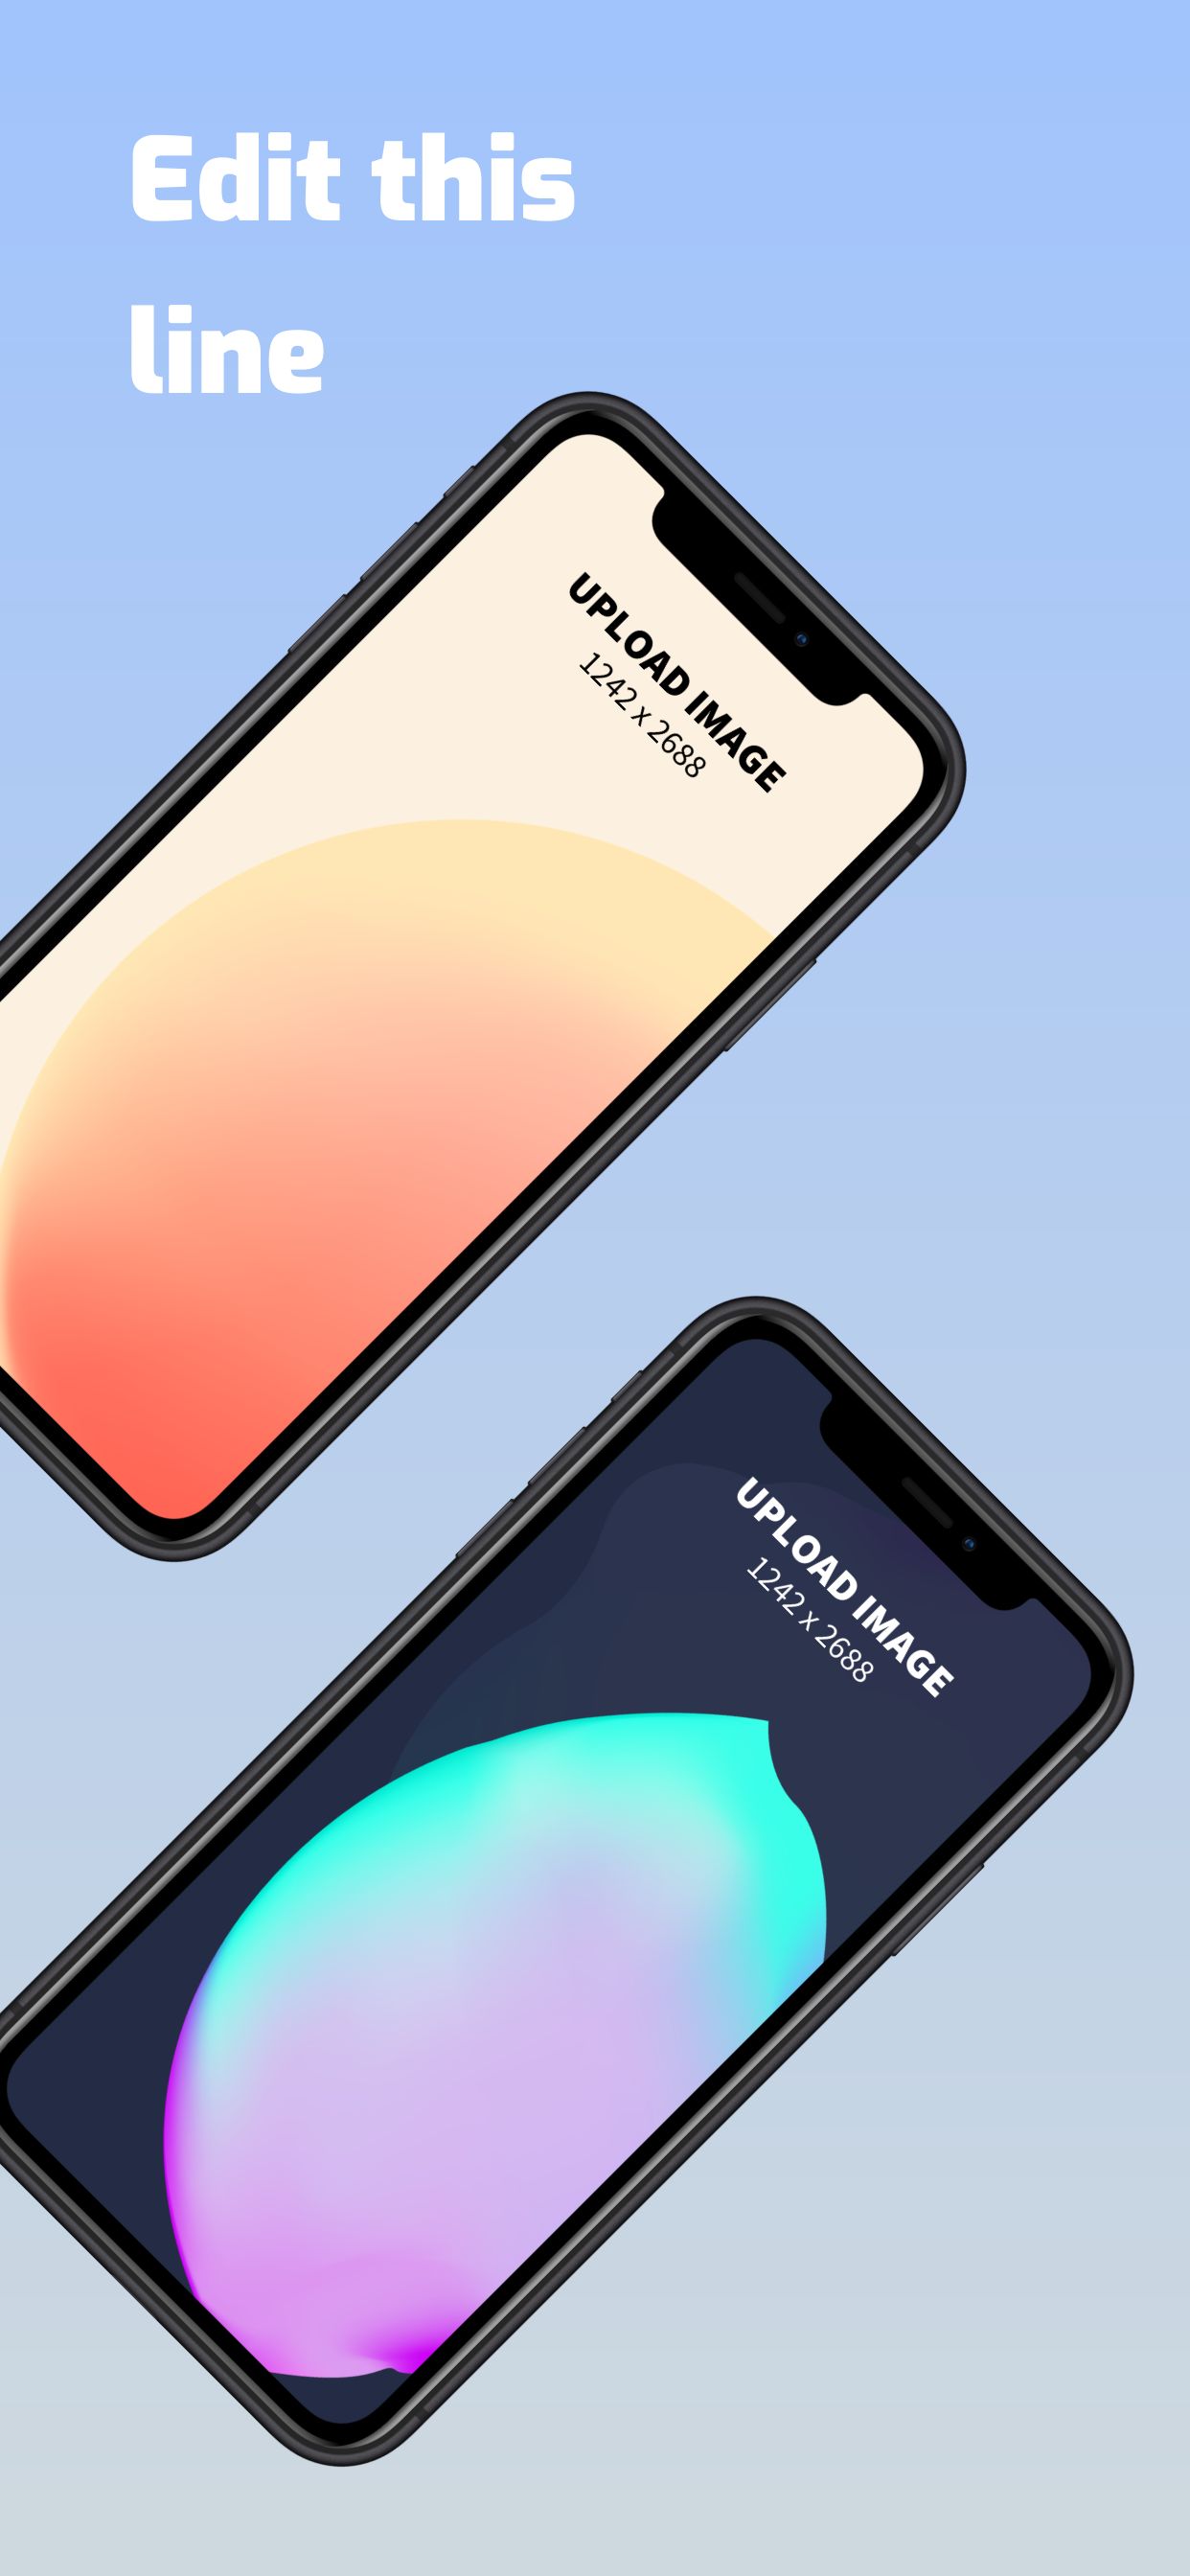 iPhone XS Max Screenshot 9 template. Quickly edit fonts, text, colors, and more for free.